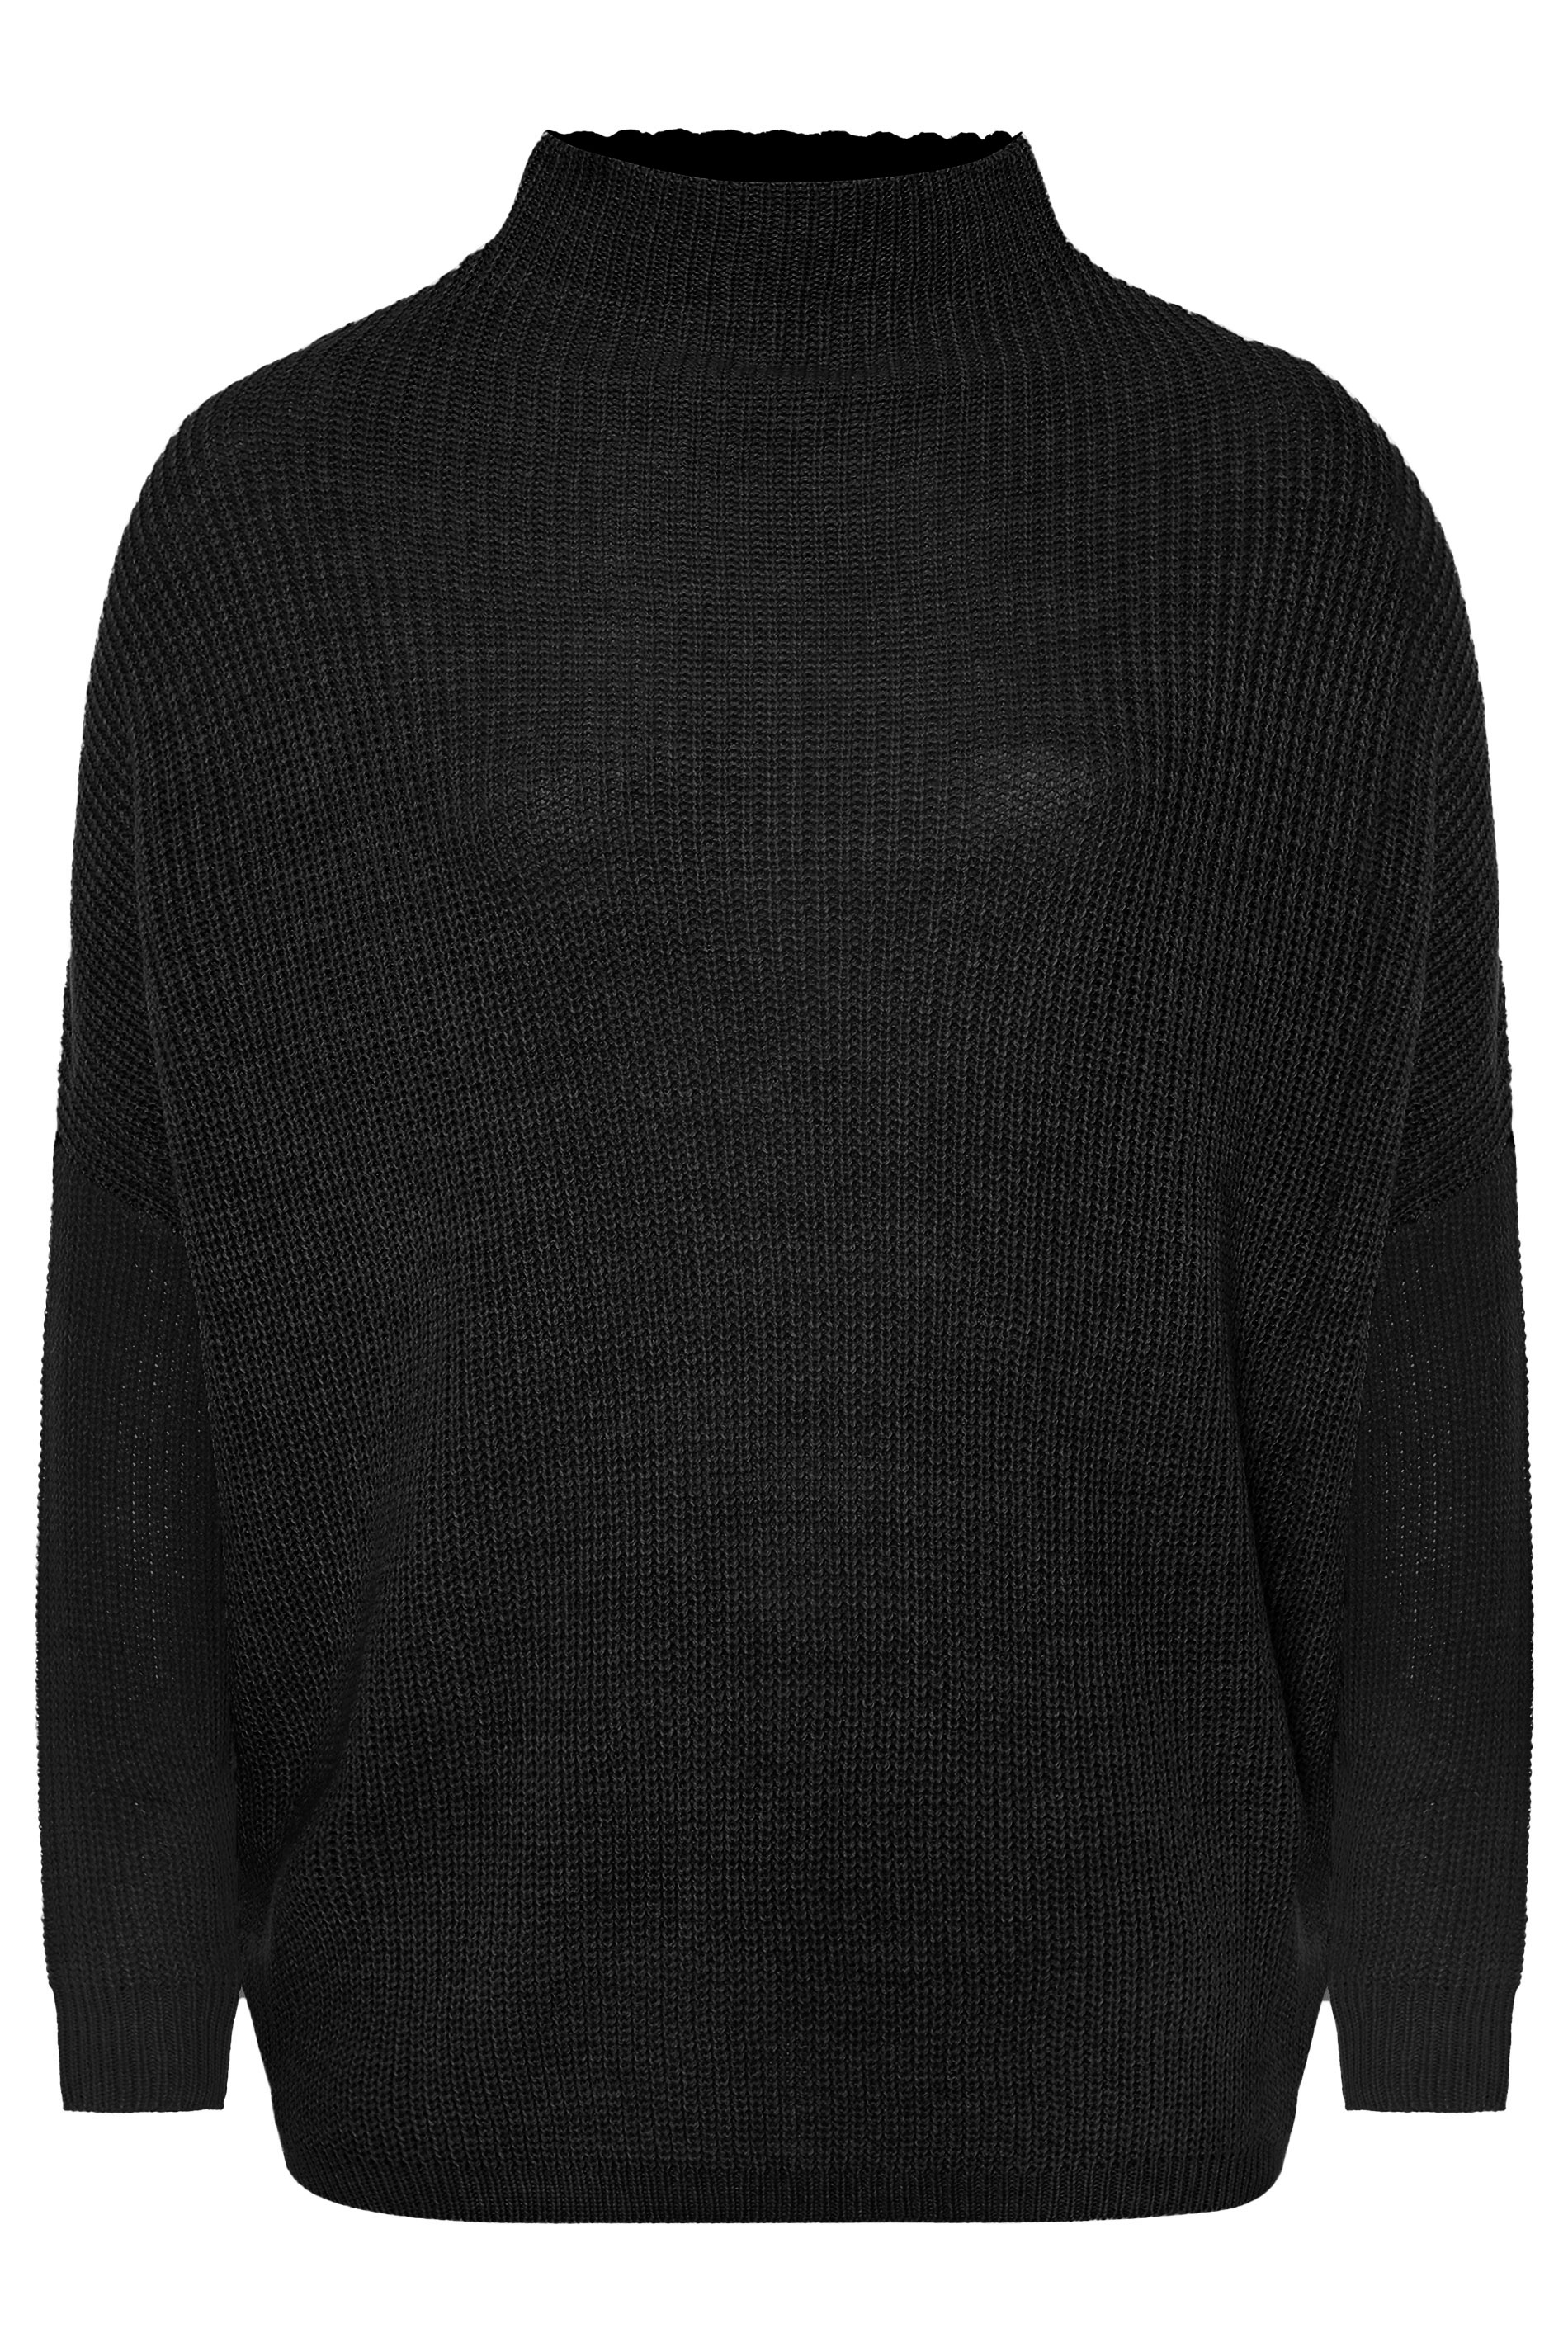 Black Oversized Knitted Jumper | Yours Clothing